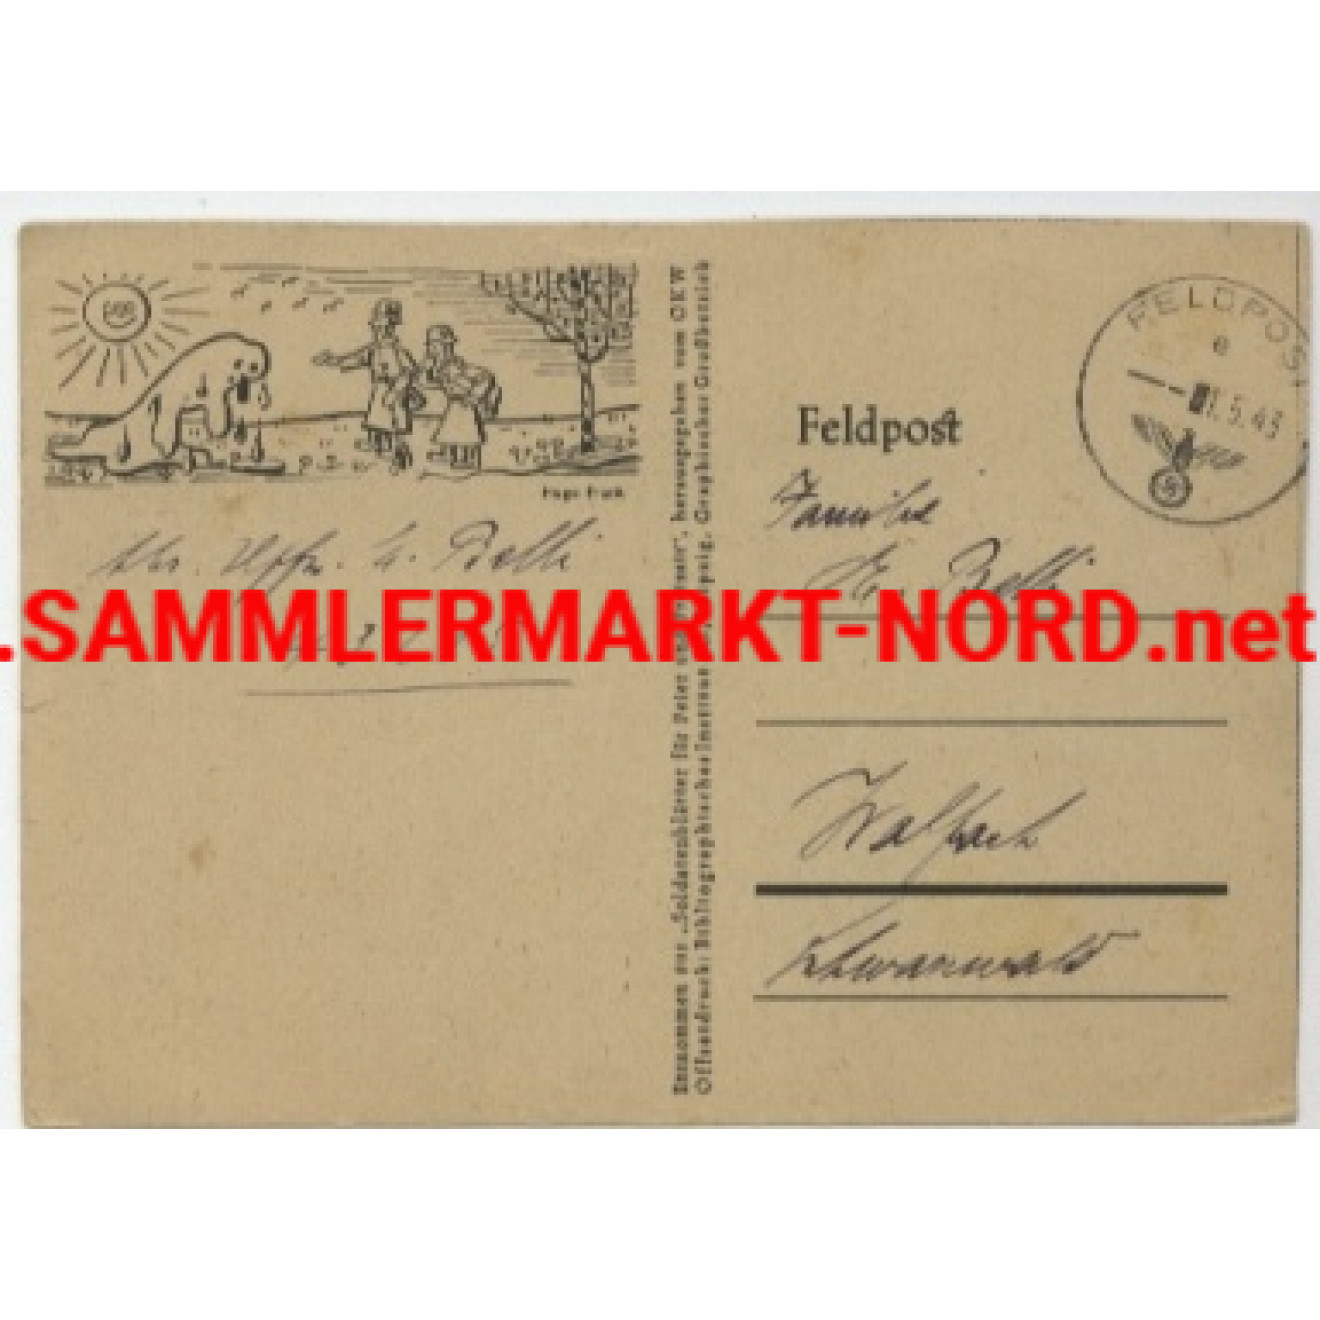 Army postal service card with illustration of soldier before a m